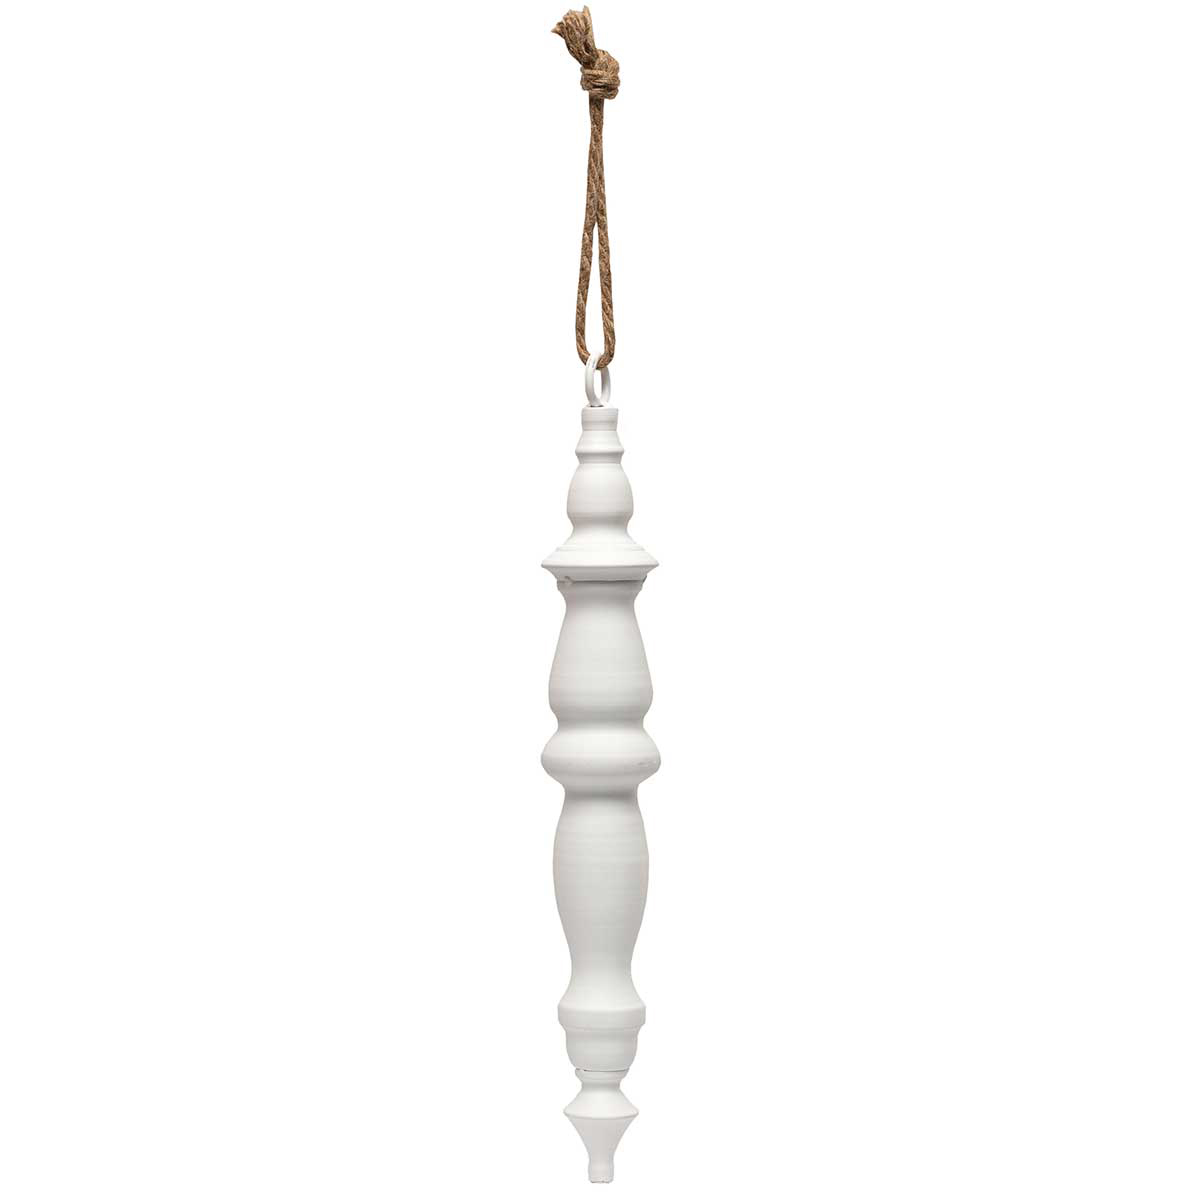 FINIAL METAL ORNAMENT MATTE WHITE WITH ROPE HANGER LARGE